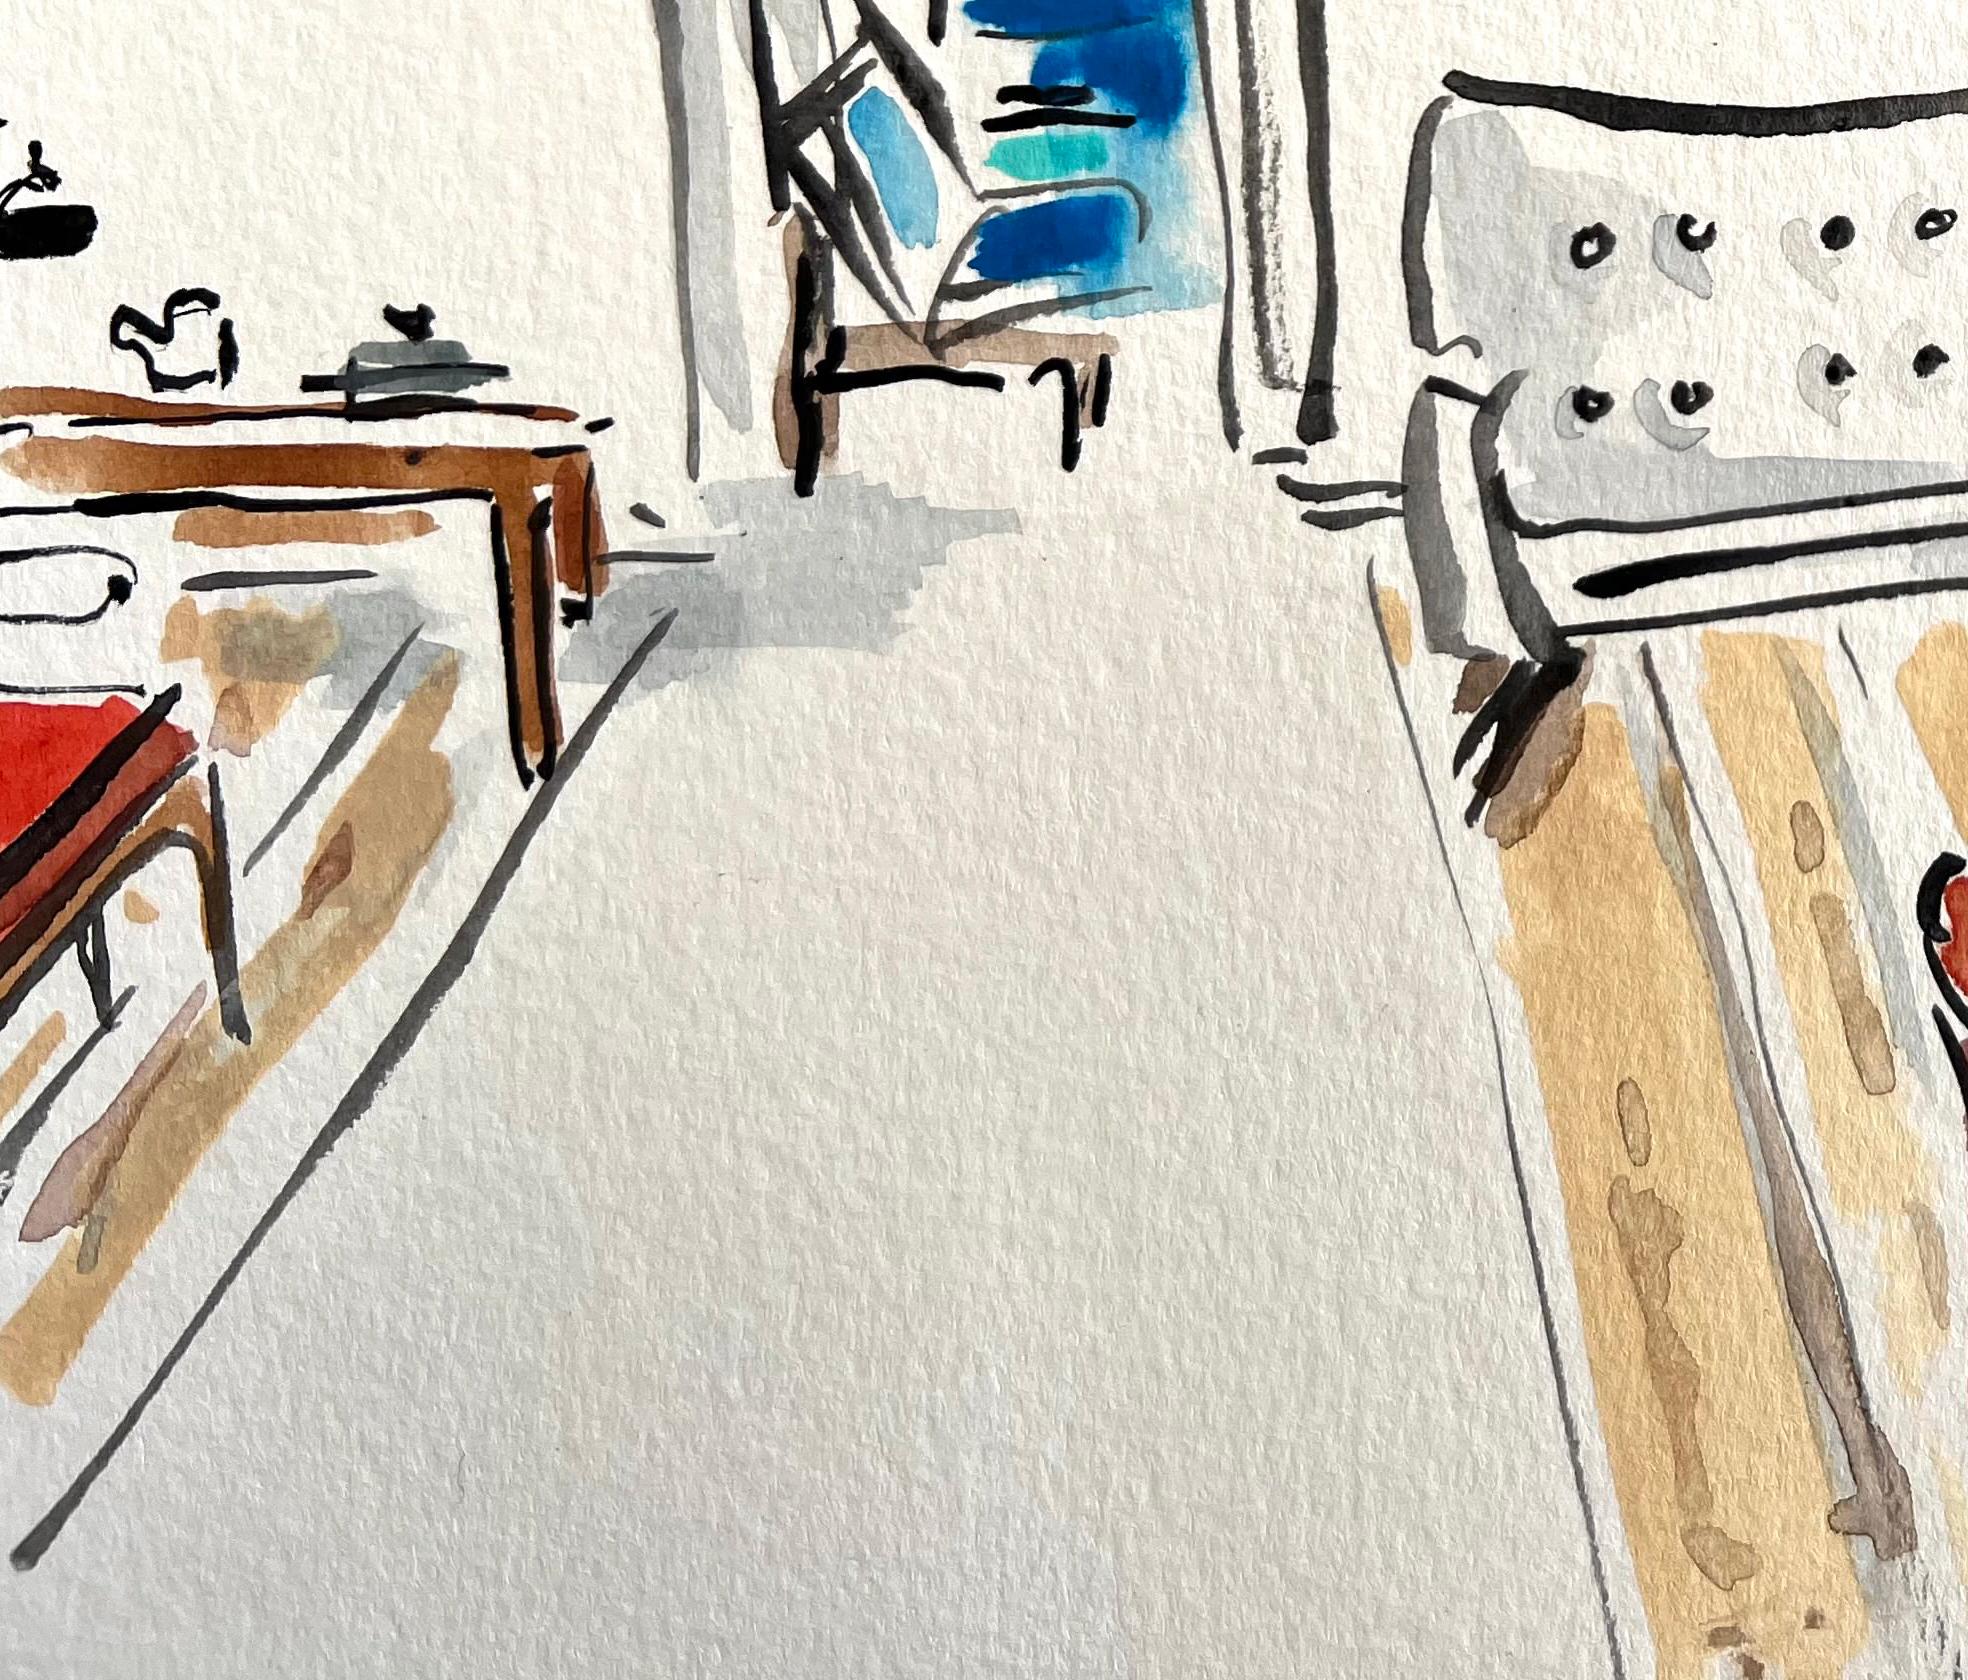 Furniture designer and architeFinn Juhl’s home. Watercolor and gouache on paper. - Art by Manuel Santelices